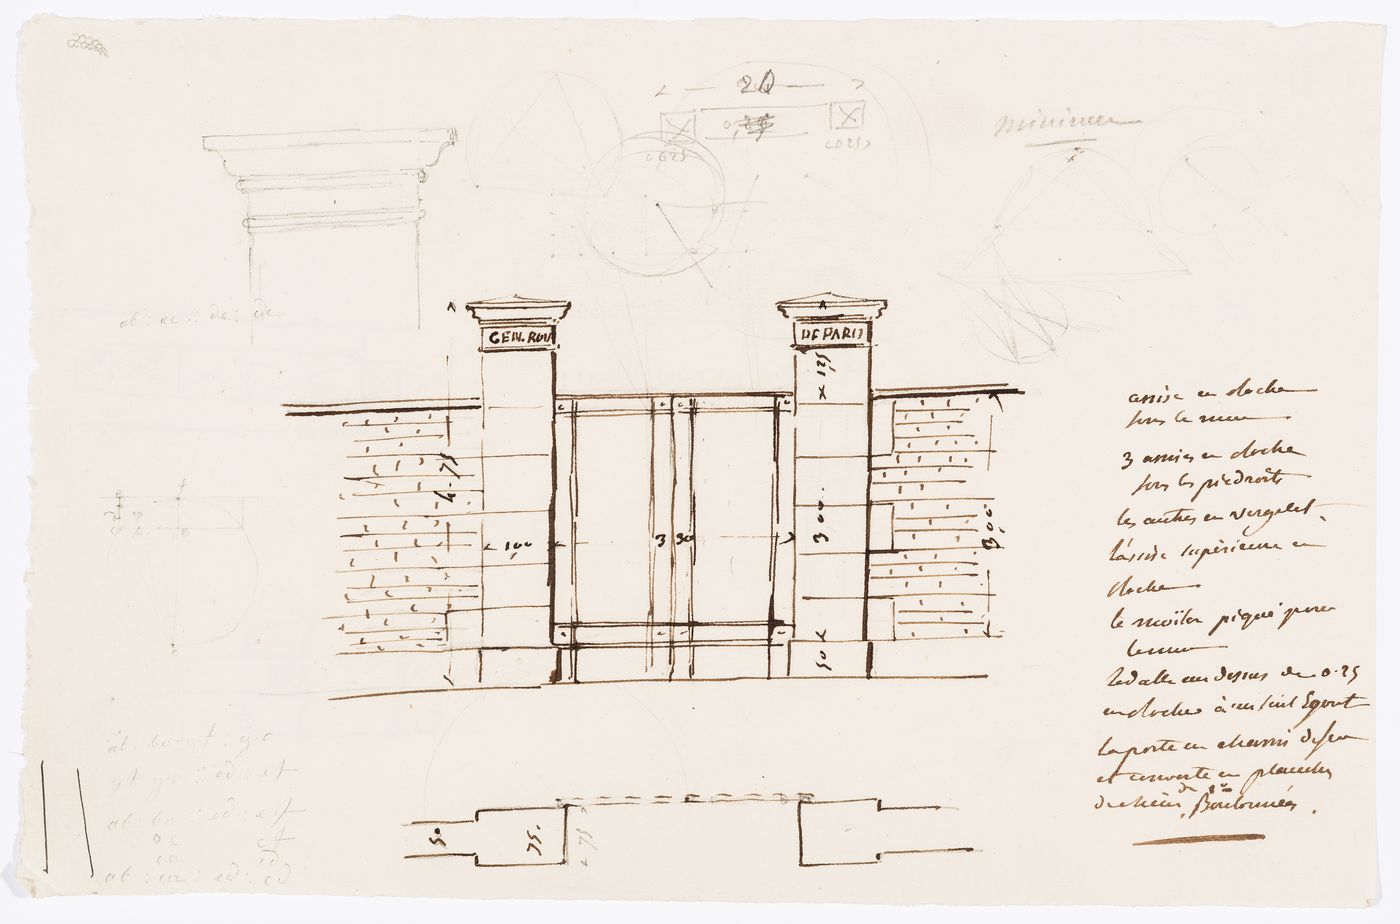 Project for alterations to the Caserne des Minimes, rue des Minimes: Elevation and plan for an entrance gateway; verso: Project for alterations to the Caserne des Minimes, rue des Minimes: Sketch sections for an entrance gateway